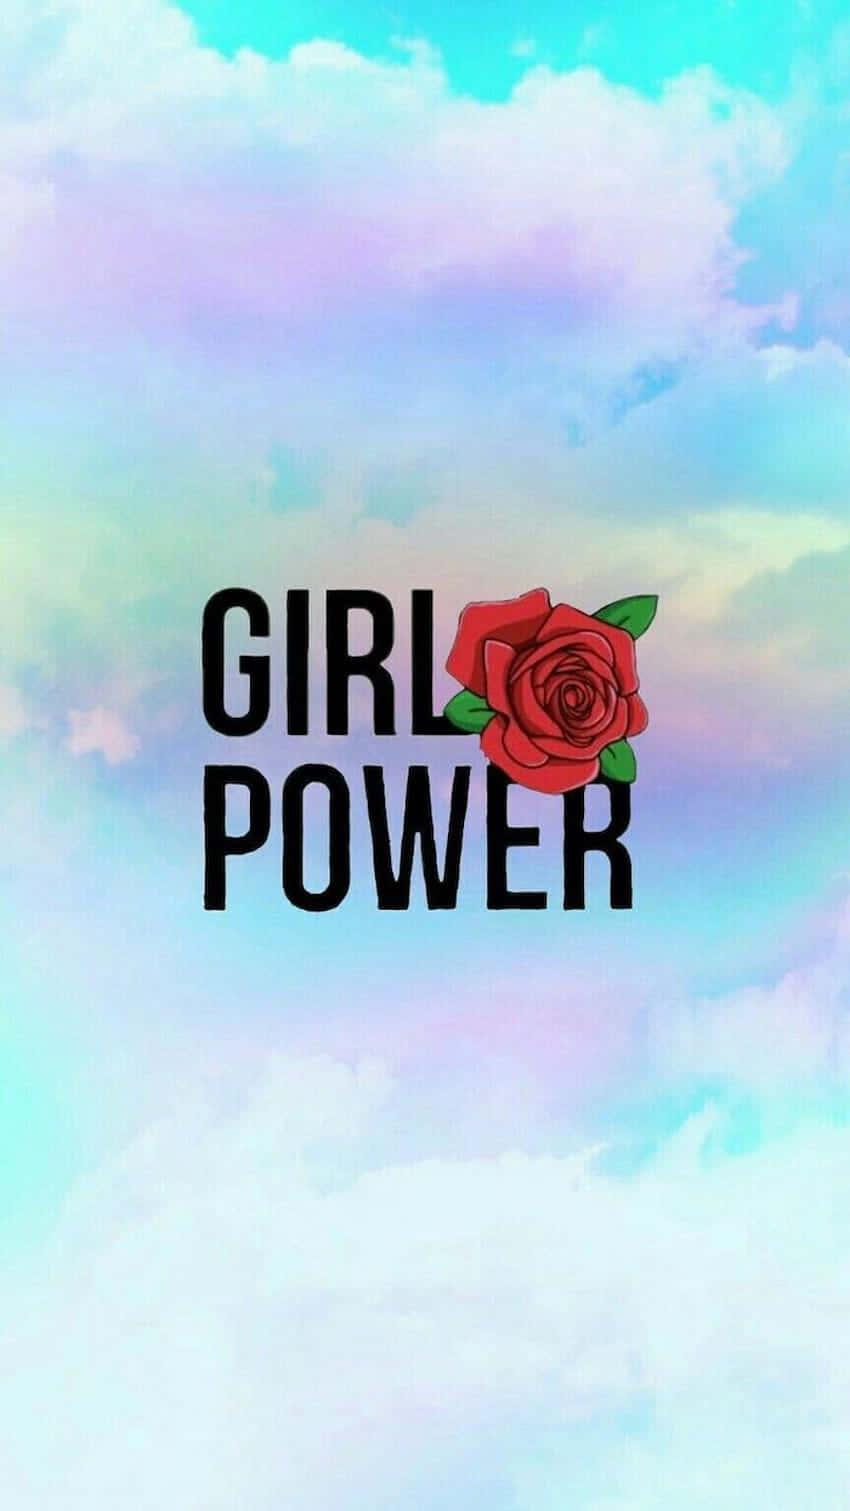 Girl Power Rose Clouds Background Wallpaper